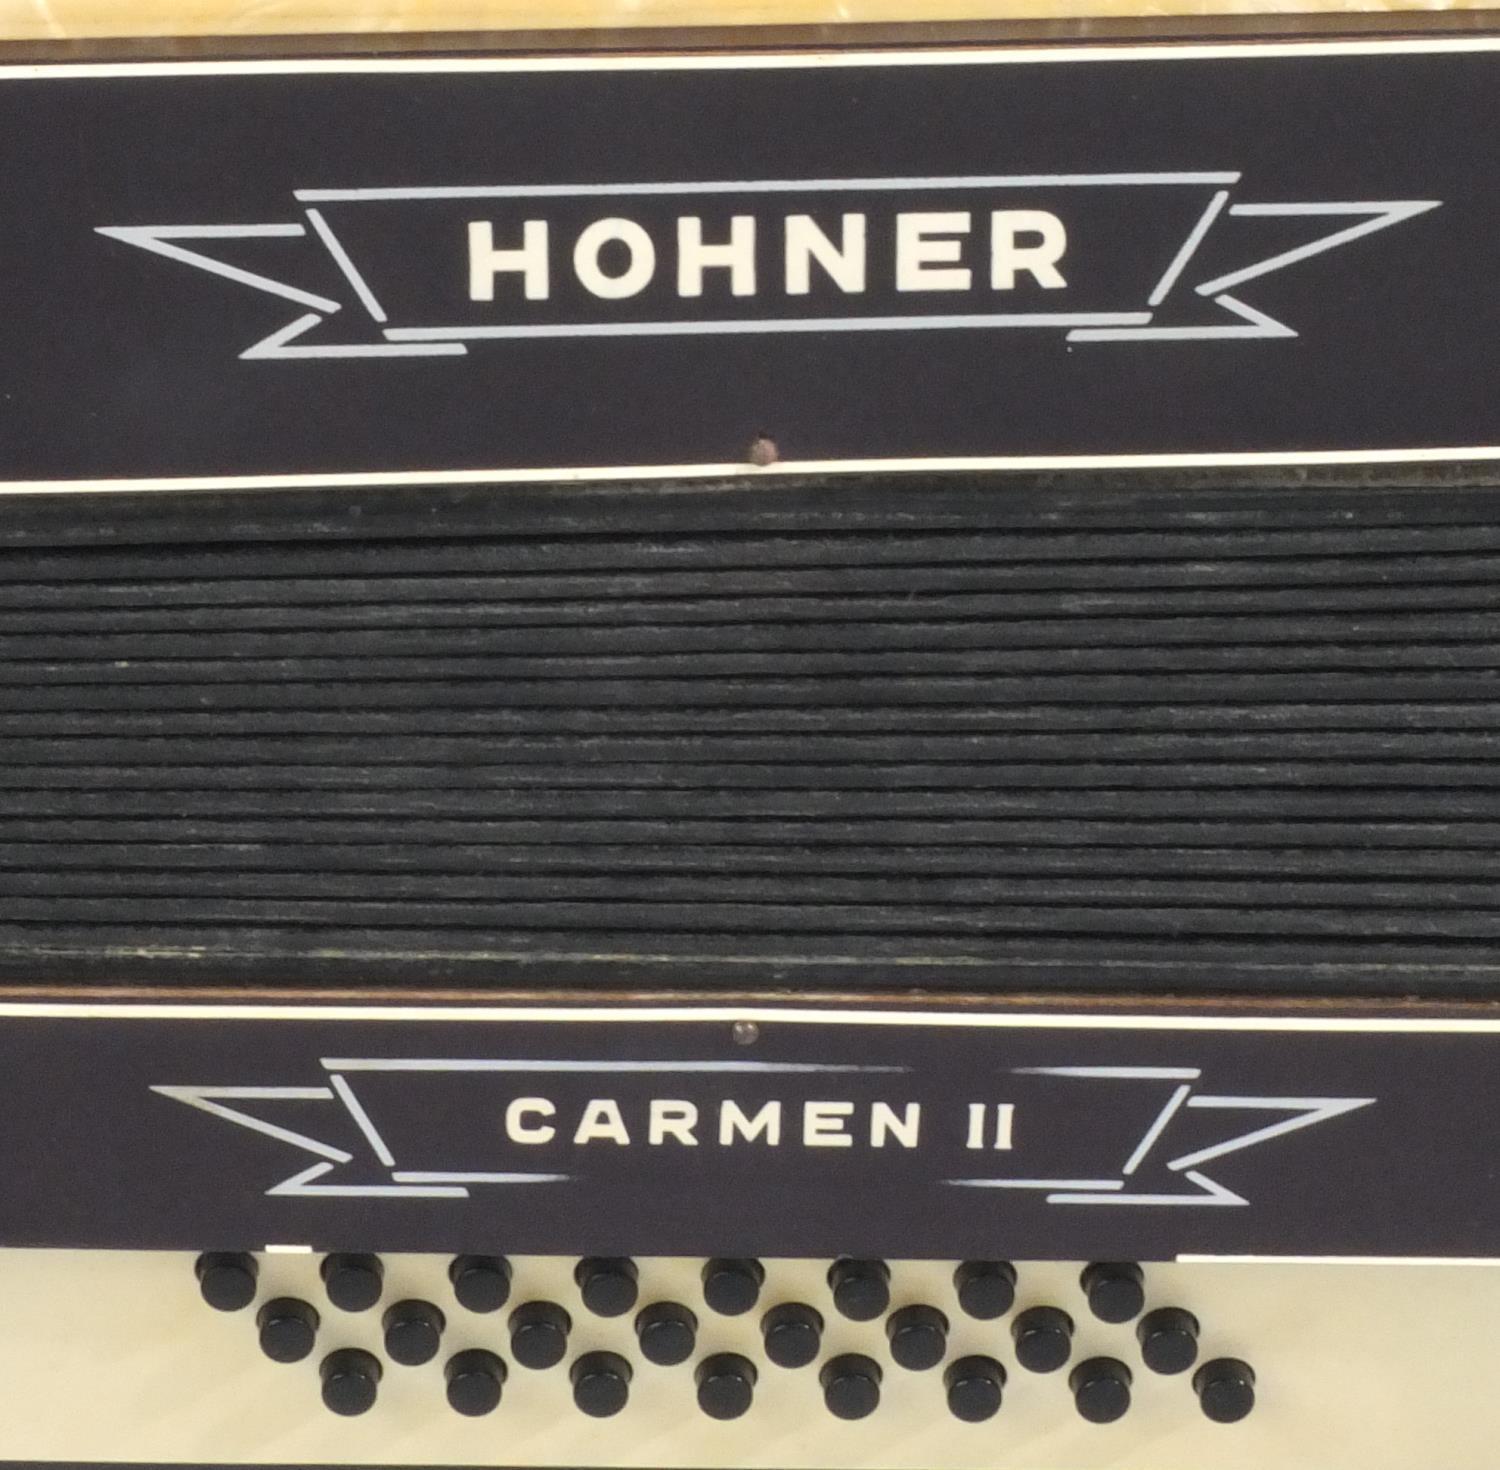 Hohner Carmen II piano/accordion with case, 39cm wide - Image 5 of 5